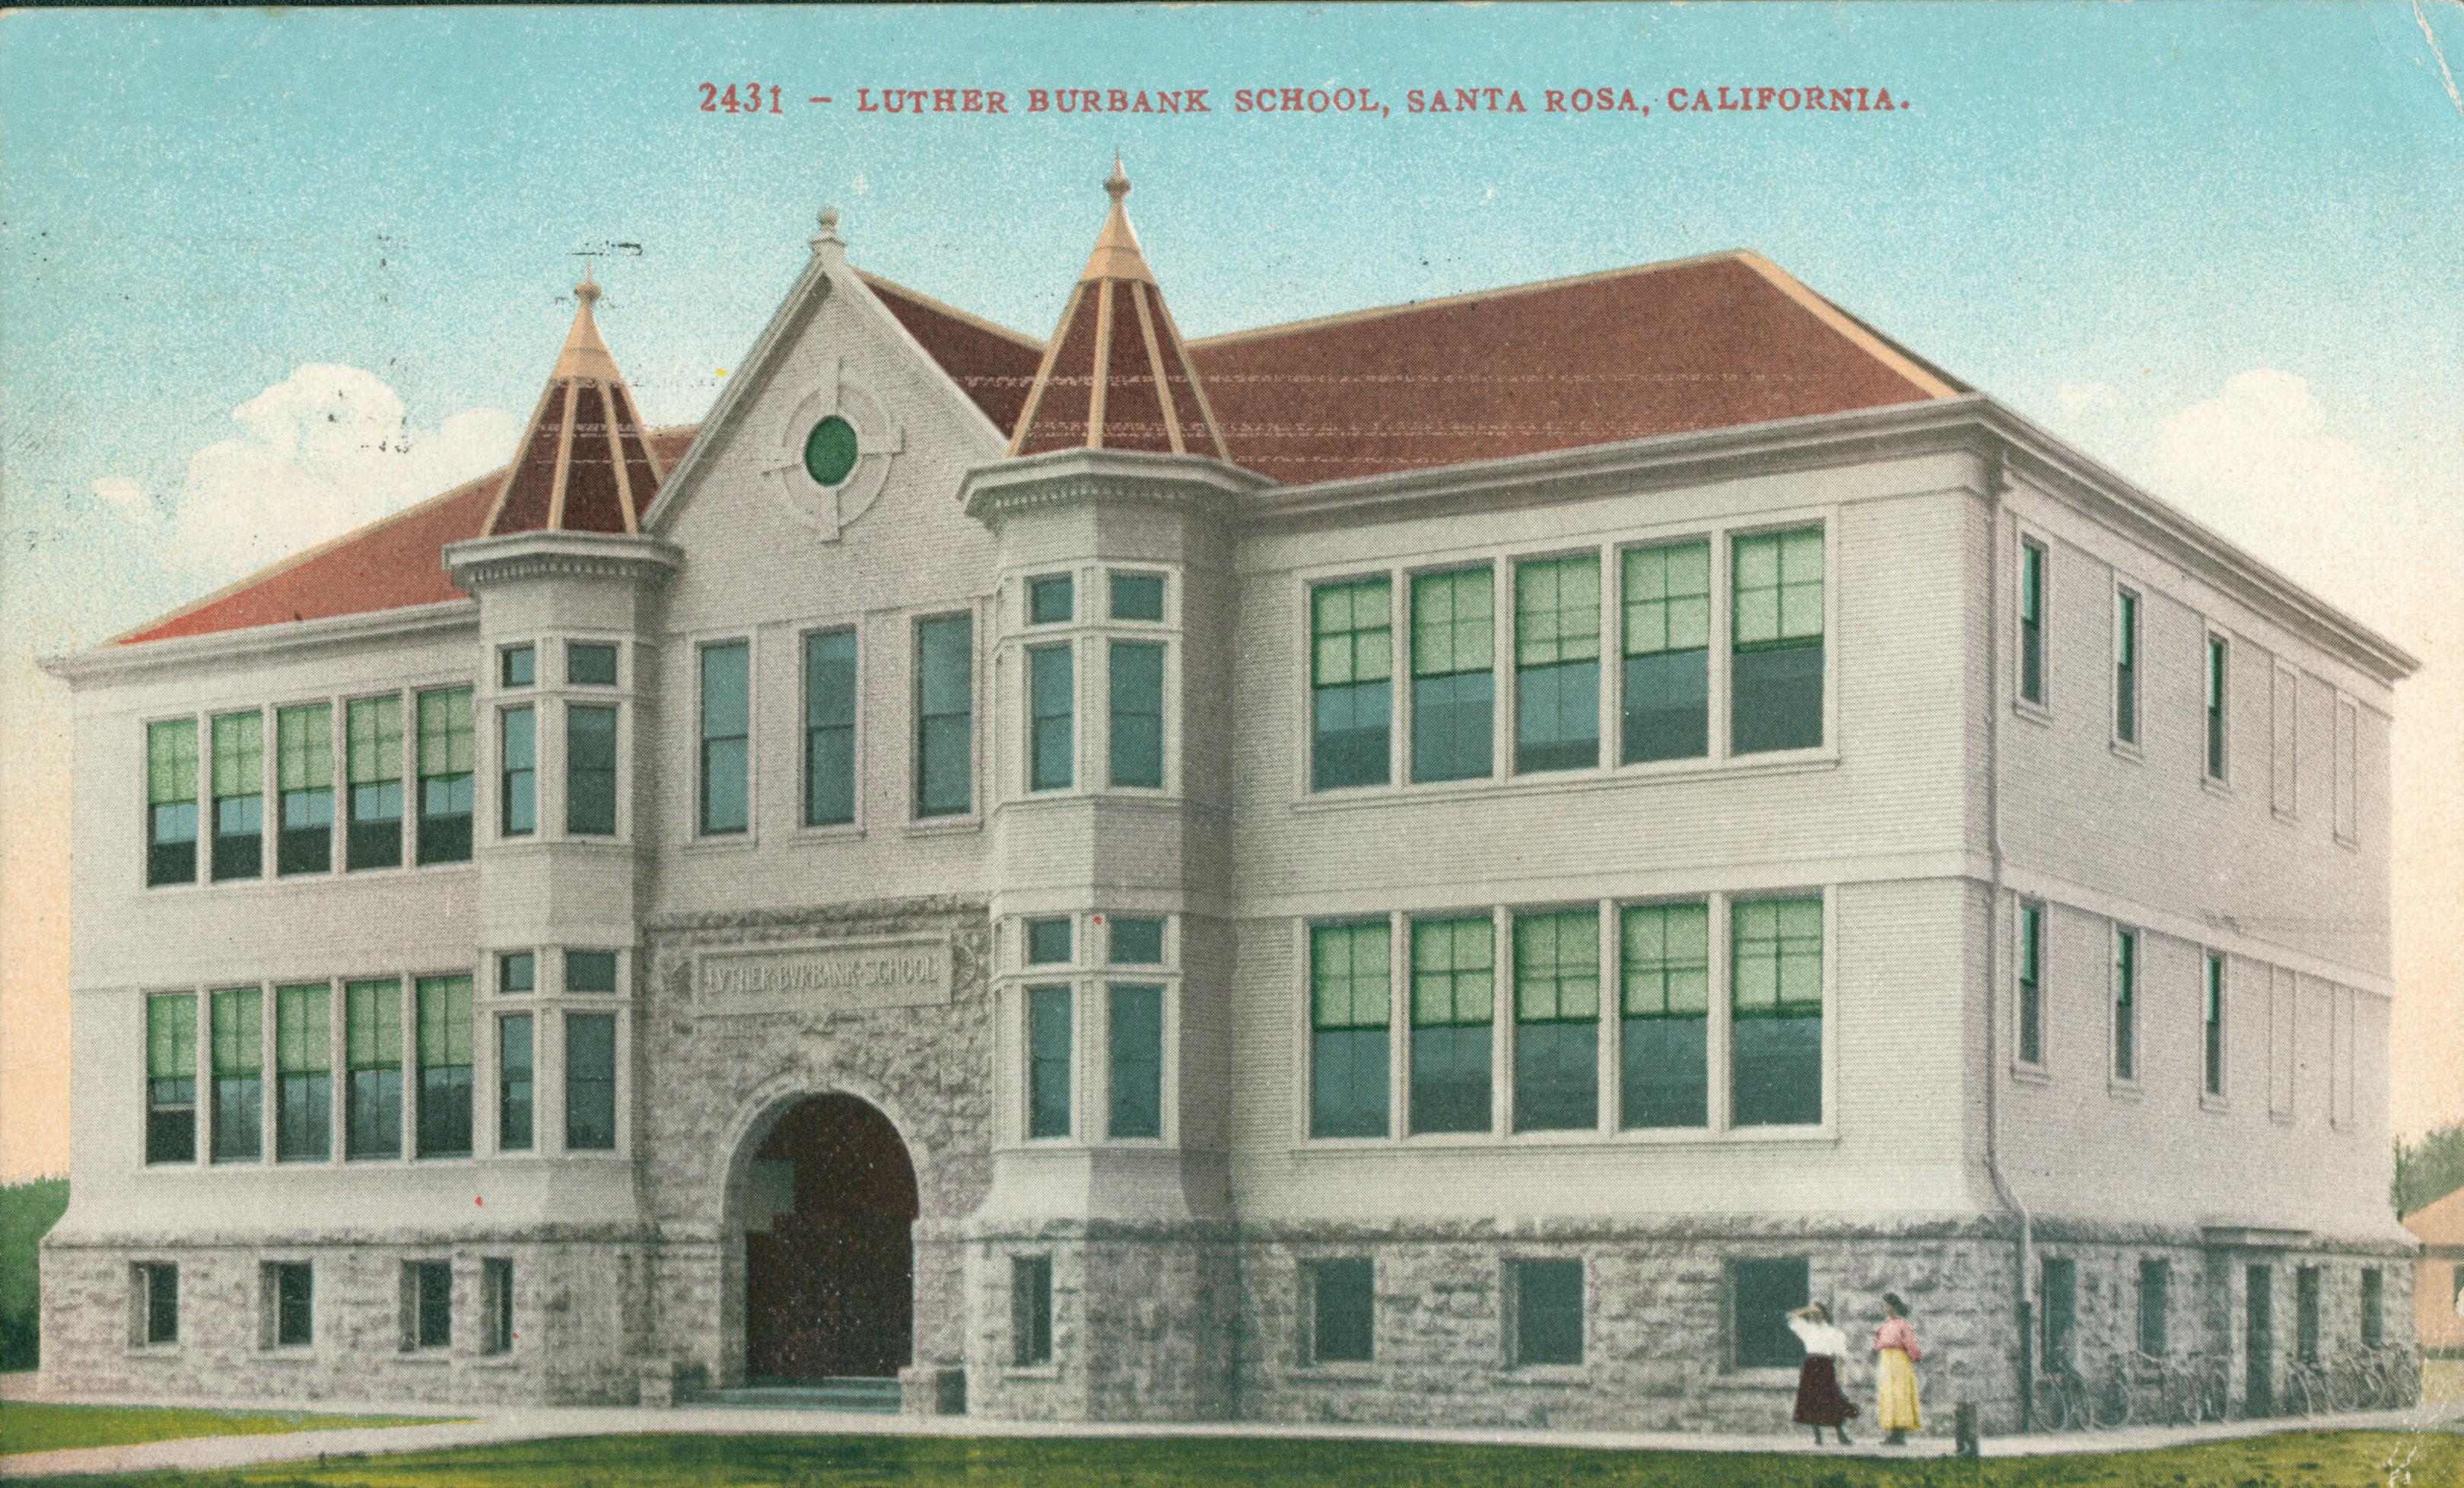 Shows a corner view of Luther Burbank school